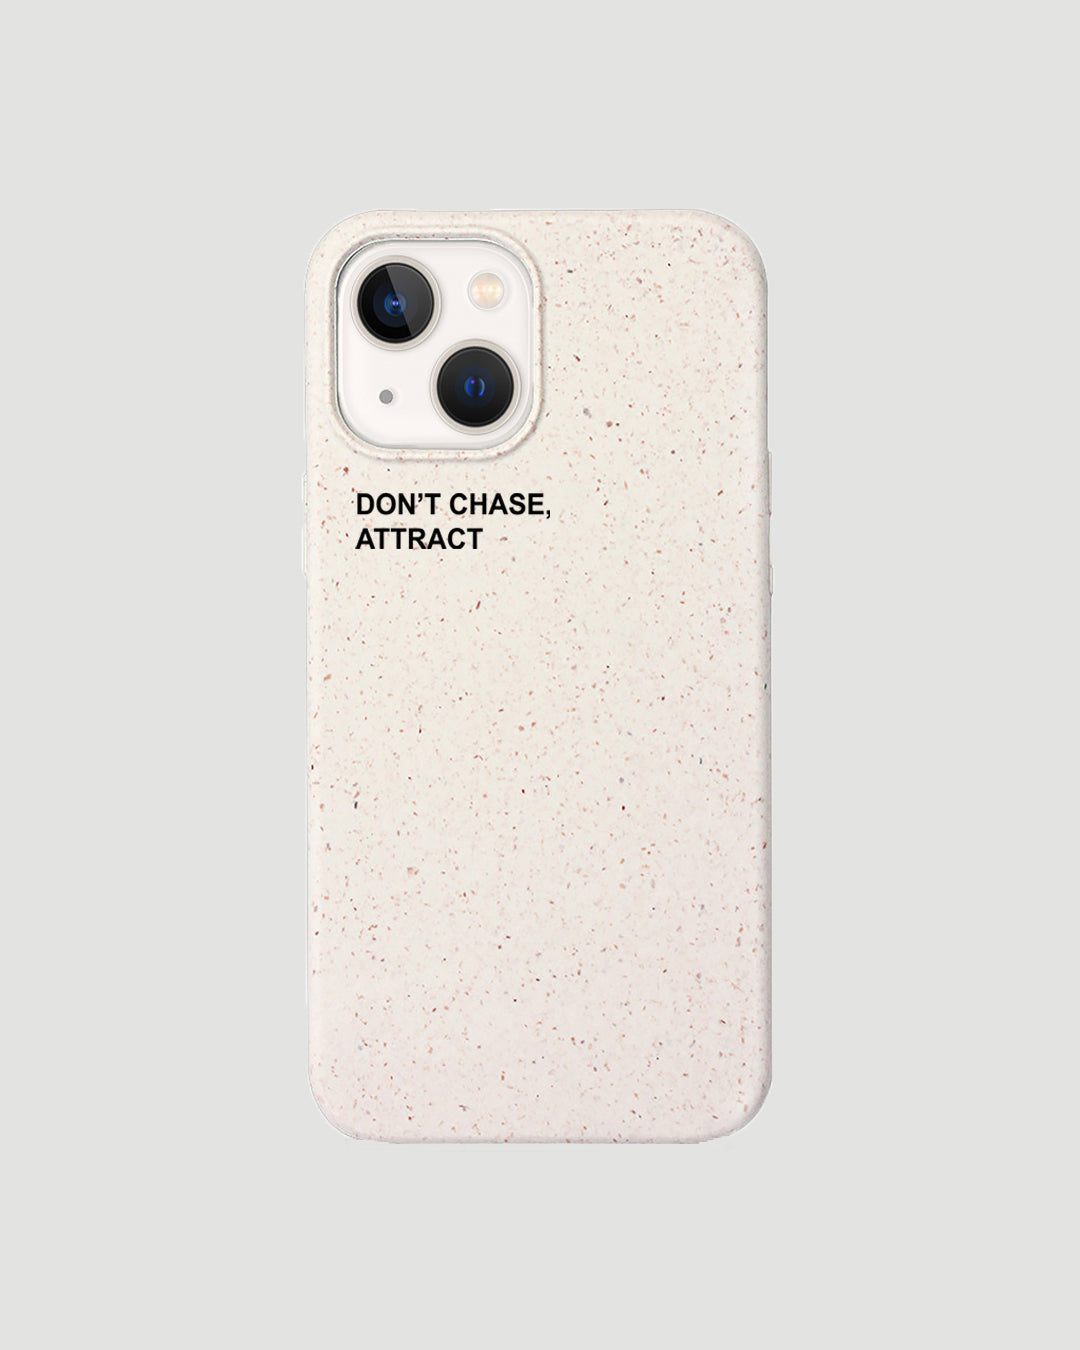 Eco-friendly iPhone Case "Don't Chase, Attract"